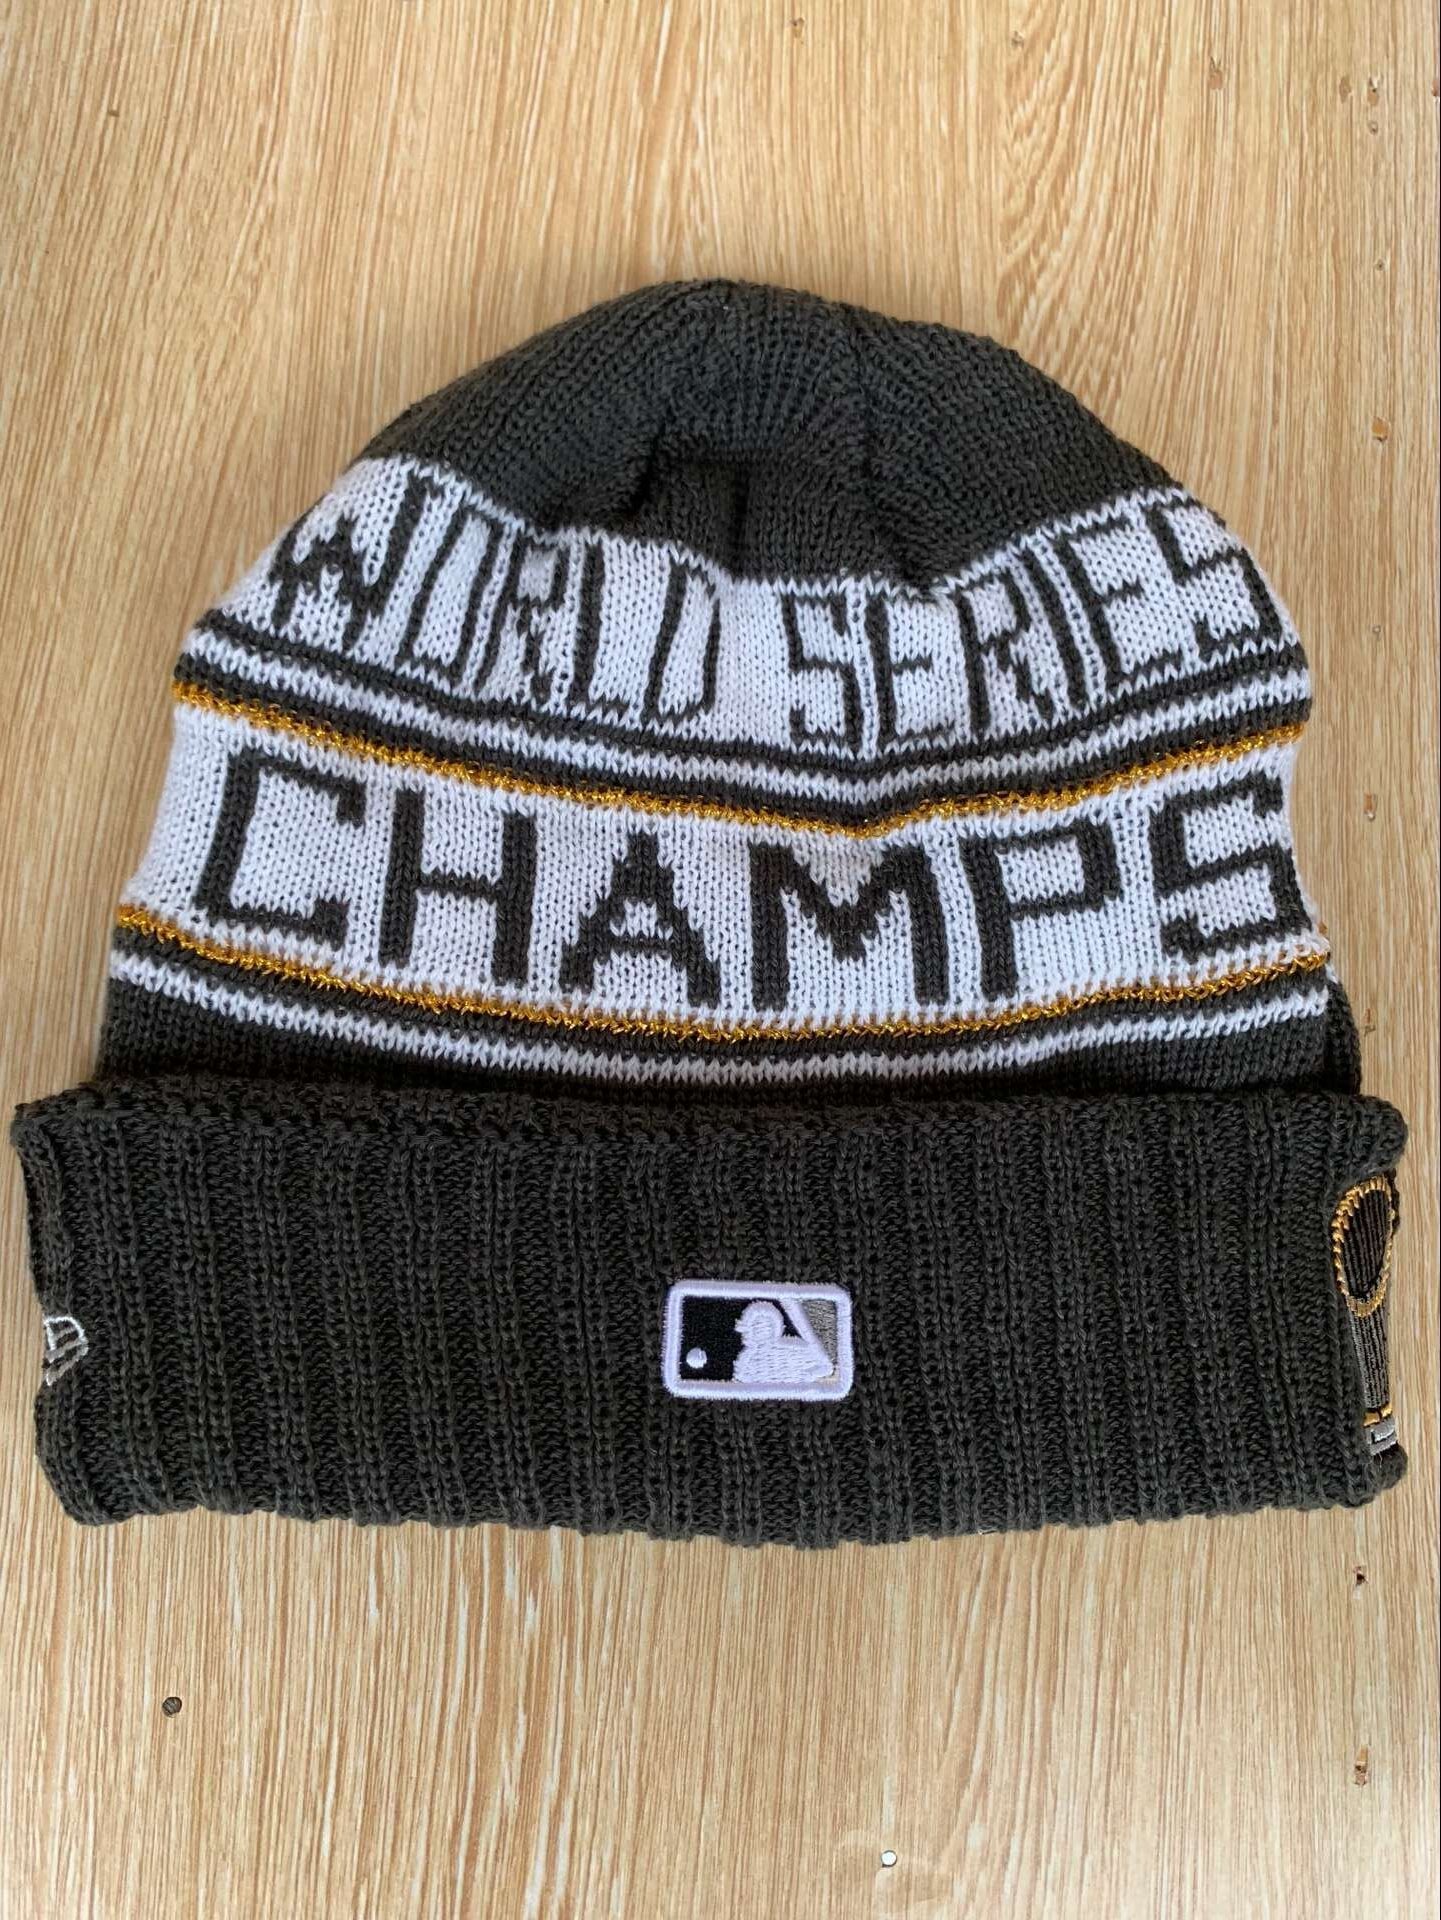 Red Sox 2018 World Series Champions Knit Hat YD